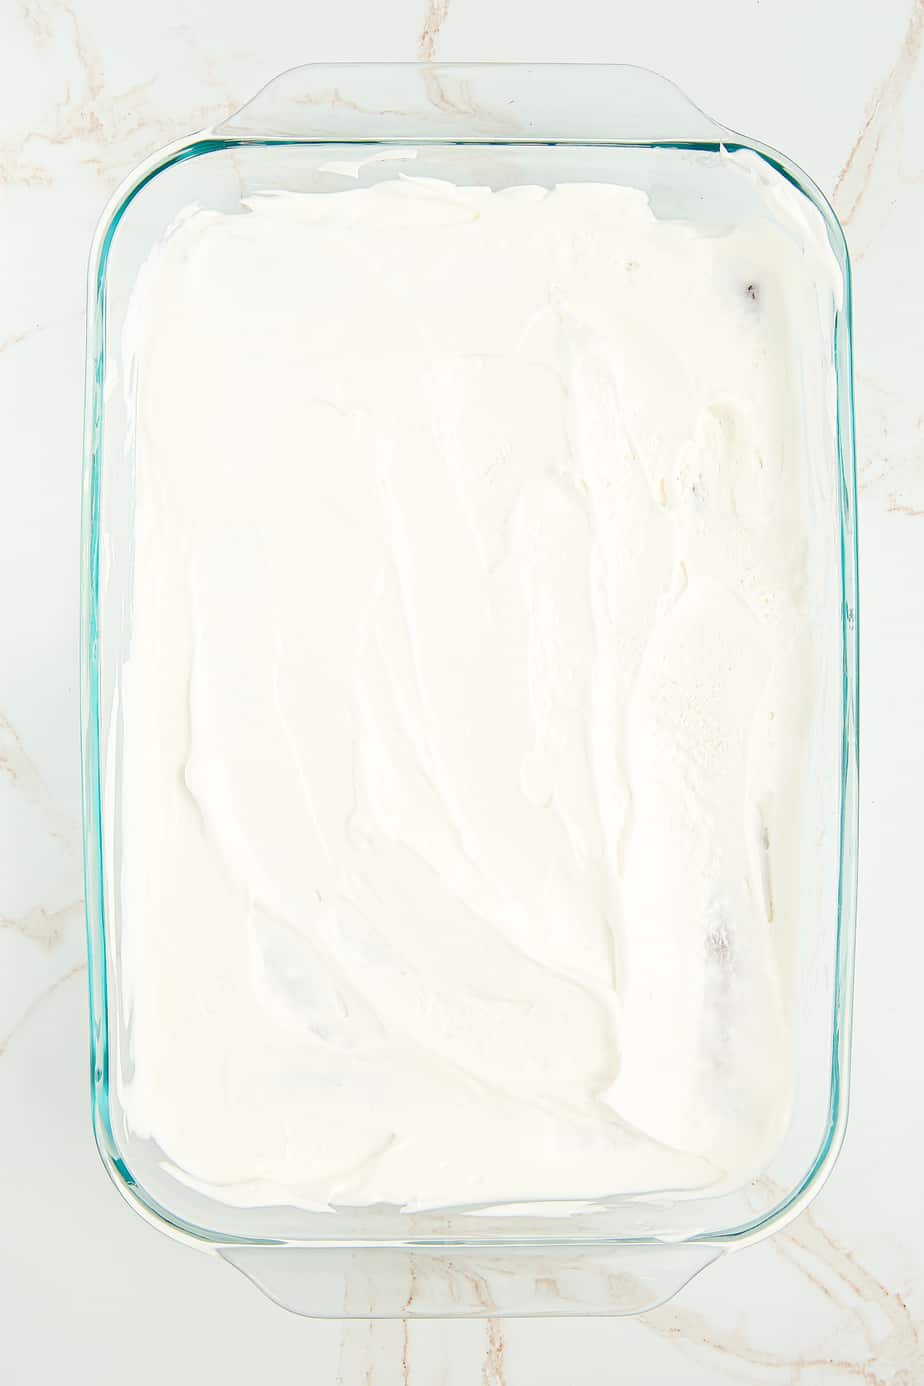 Whipped cream layer spread on top of the ice cream sandwiches in a rectangular pan from overhead.